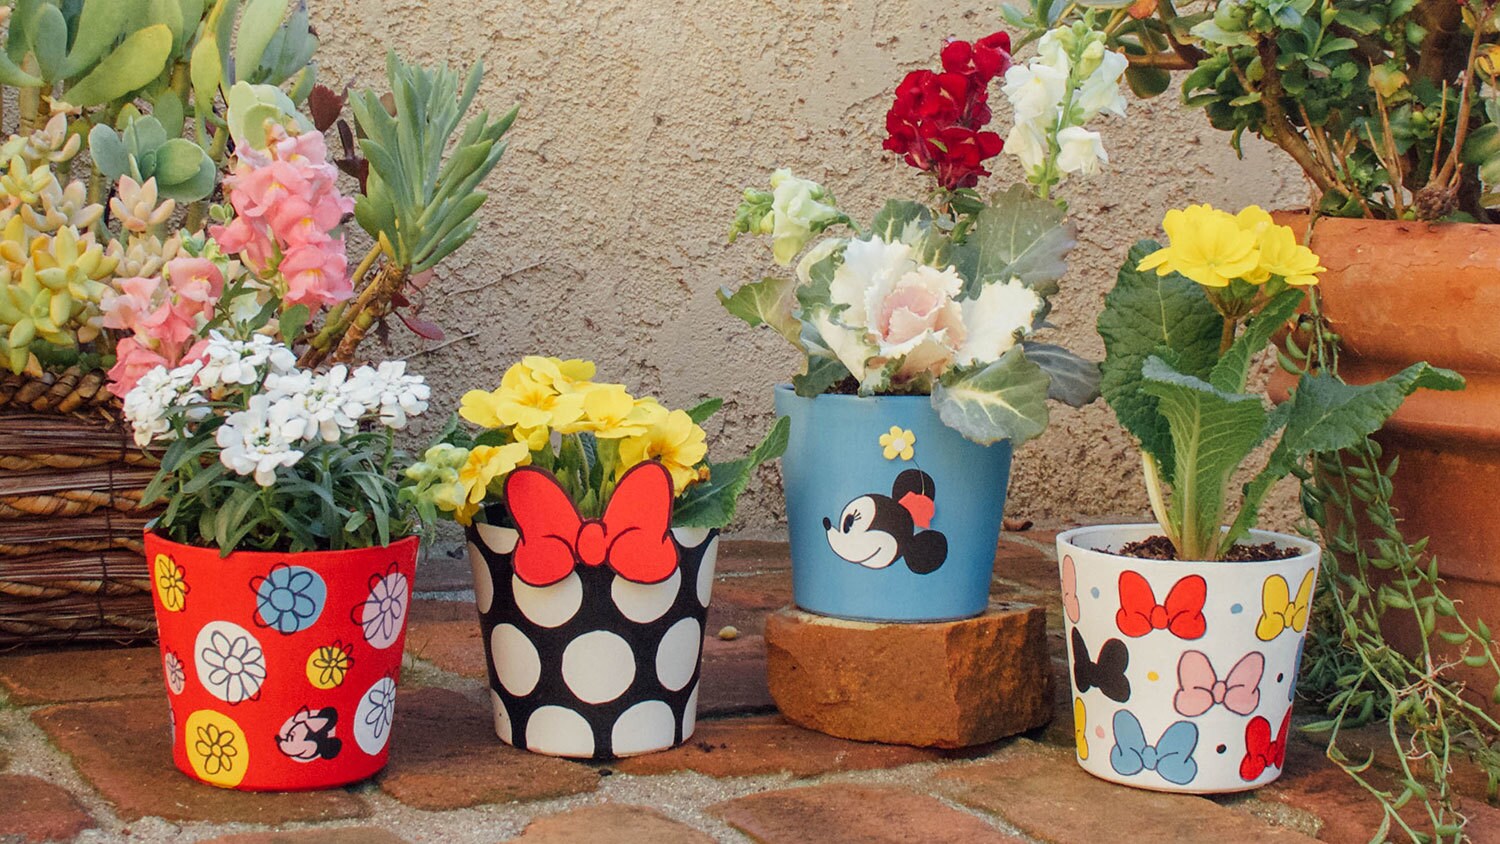 Minnie Mouse themed DIY flower pots with a variety of flowers.